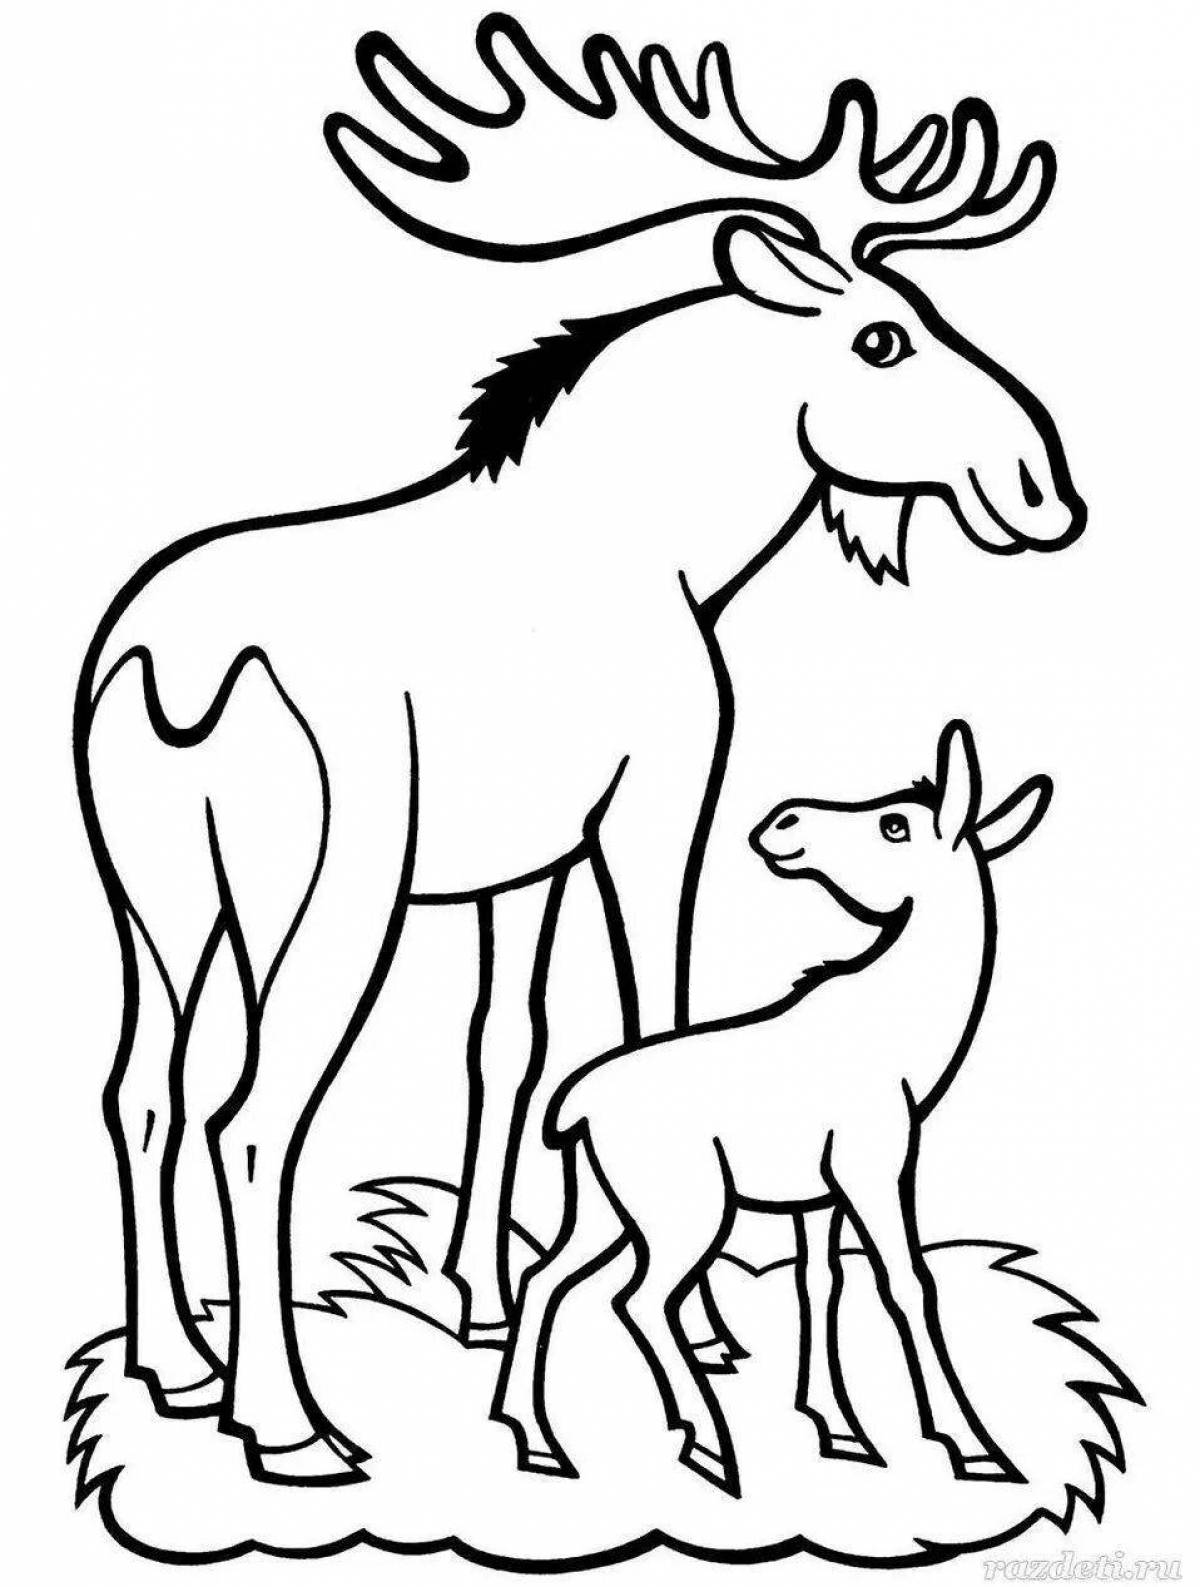 Unique elk coloring book for kids 6-7 years old